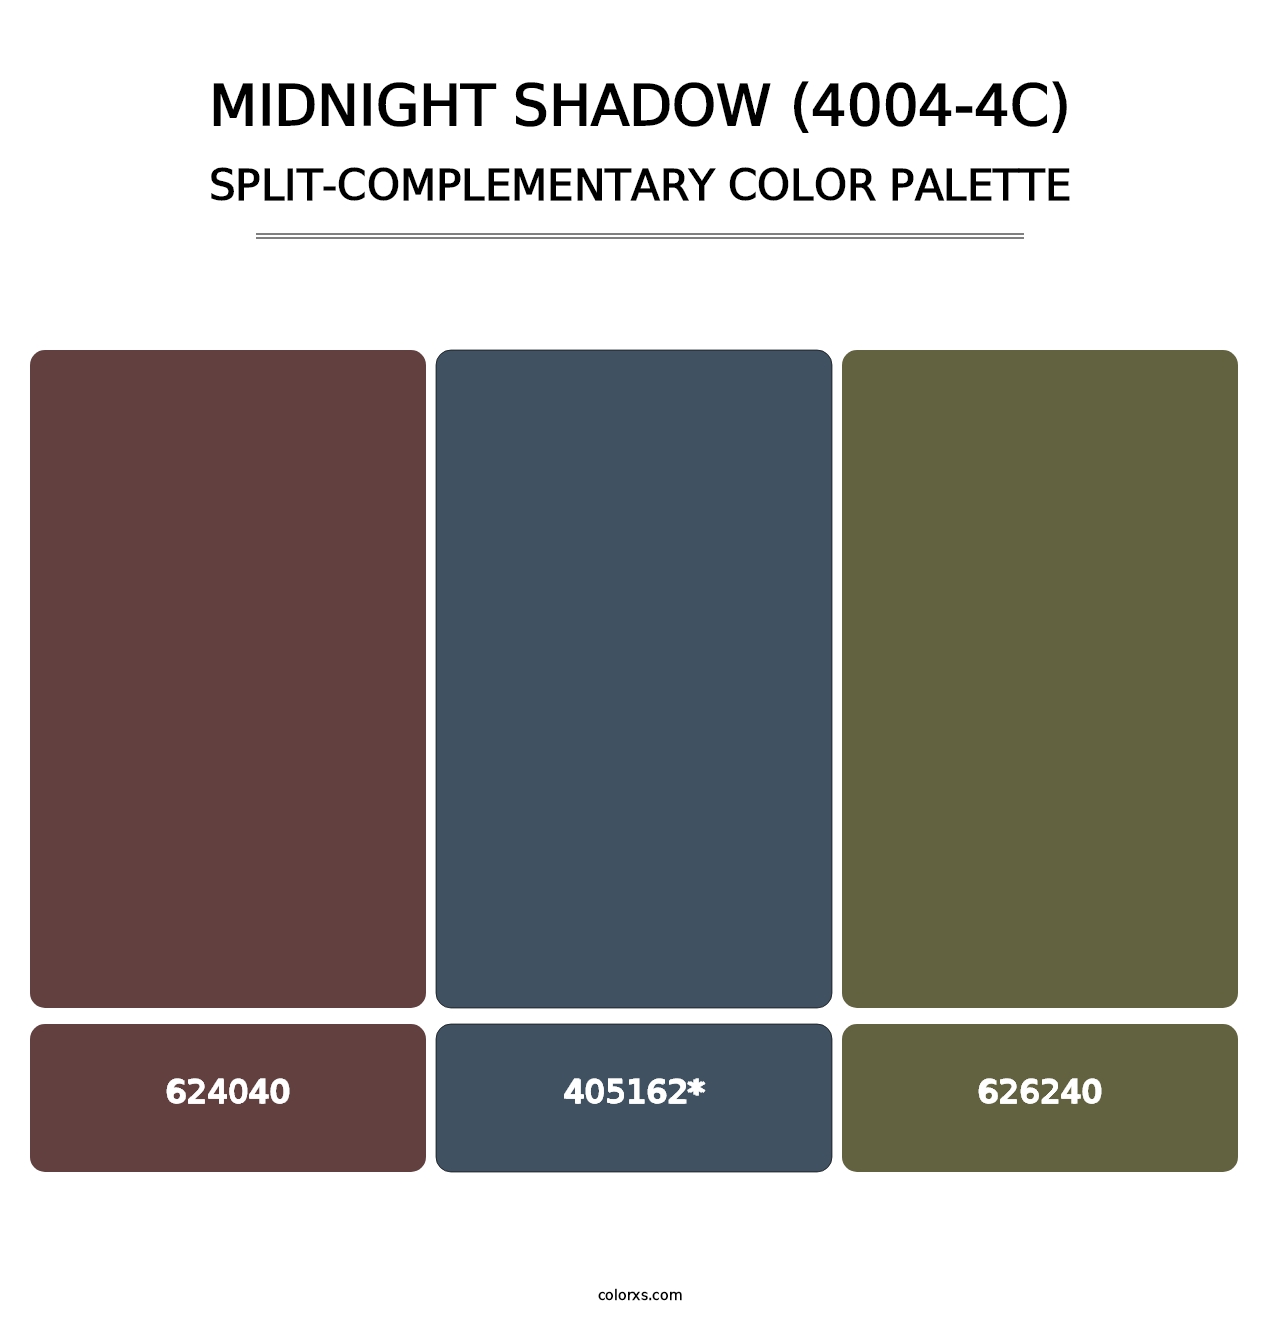 Midnight Shadow (4004-4C) - Split-Complementary Color Palette